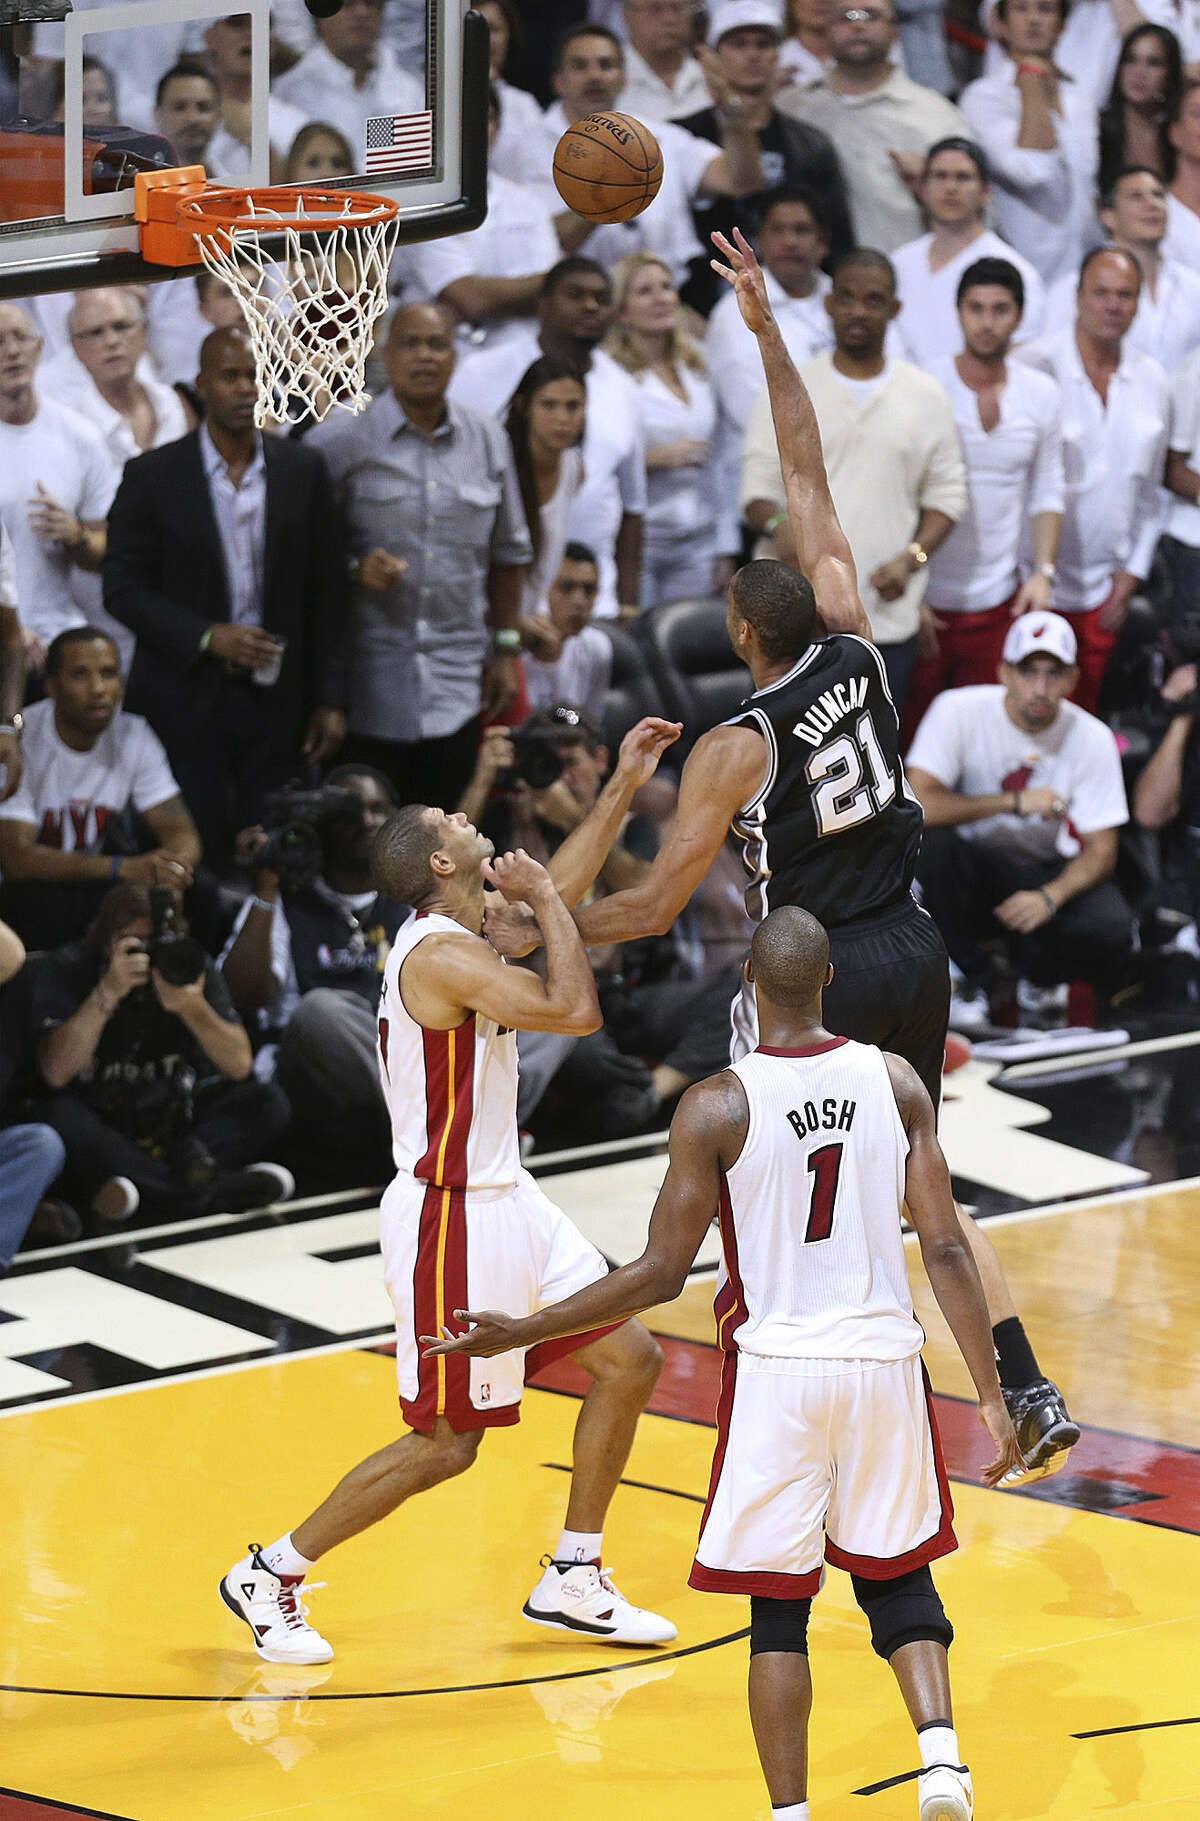 With the score 90-88, Tim Duncan misses a game-tying shot before missing a tip-in as Miami's Shane Battier defends.